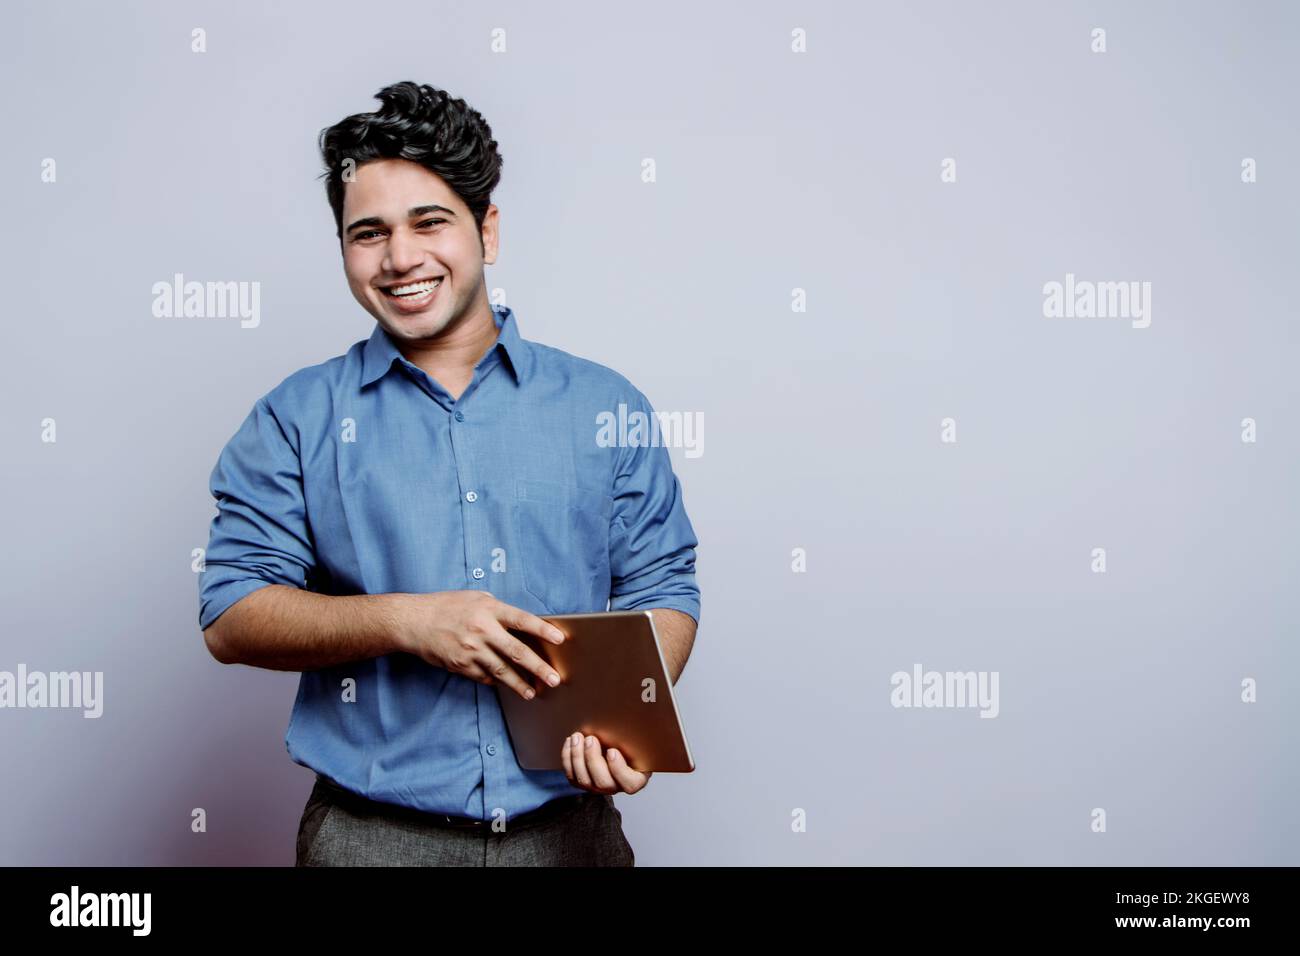 An Indian guy cant stop laughing hysterically over a joke, laughing out loud holding digital tablet and looking at the camera. comedian colleagues. Stock Photo